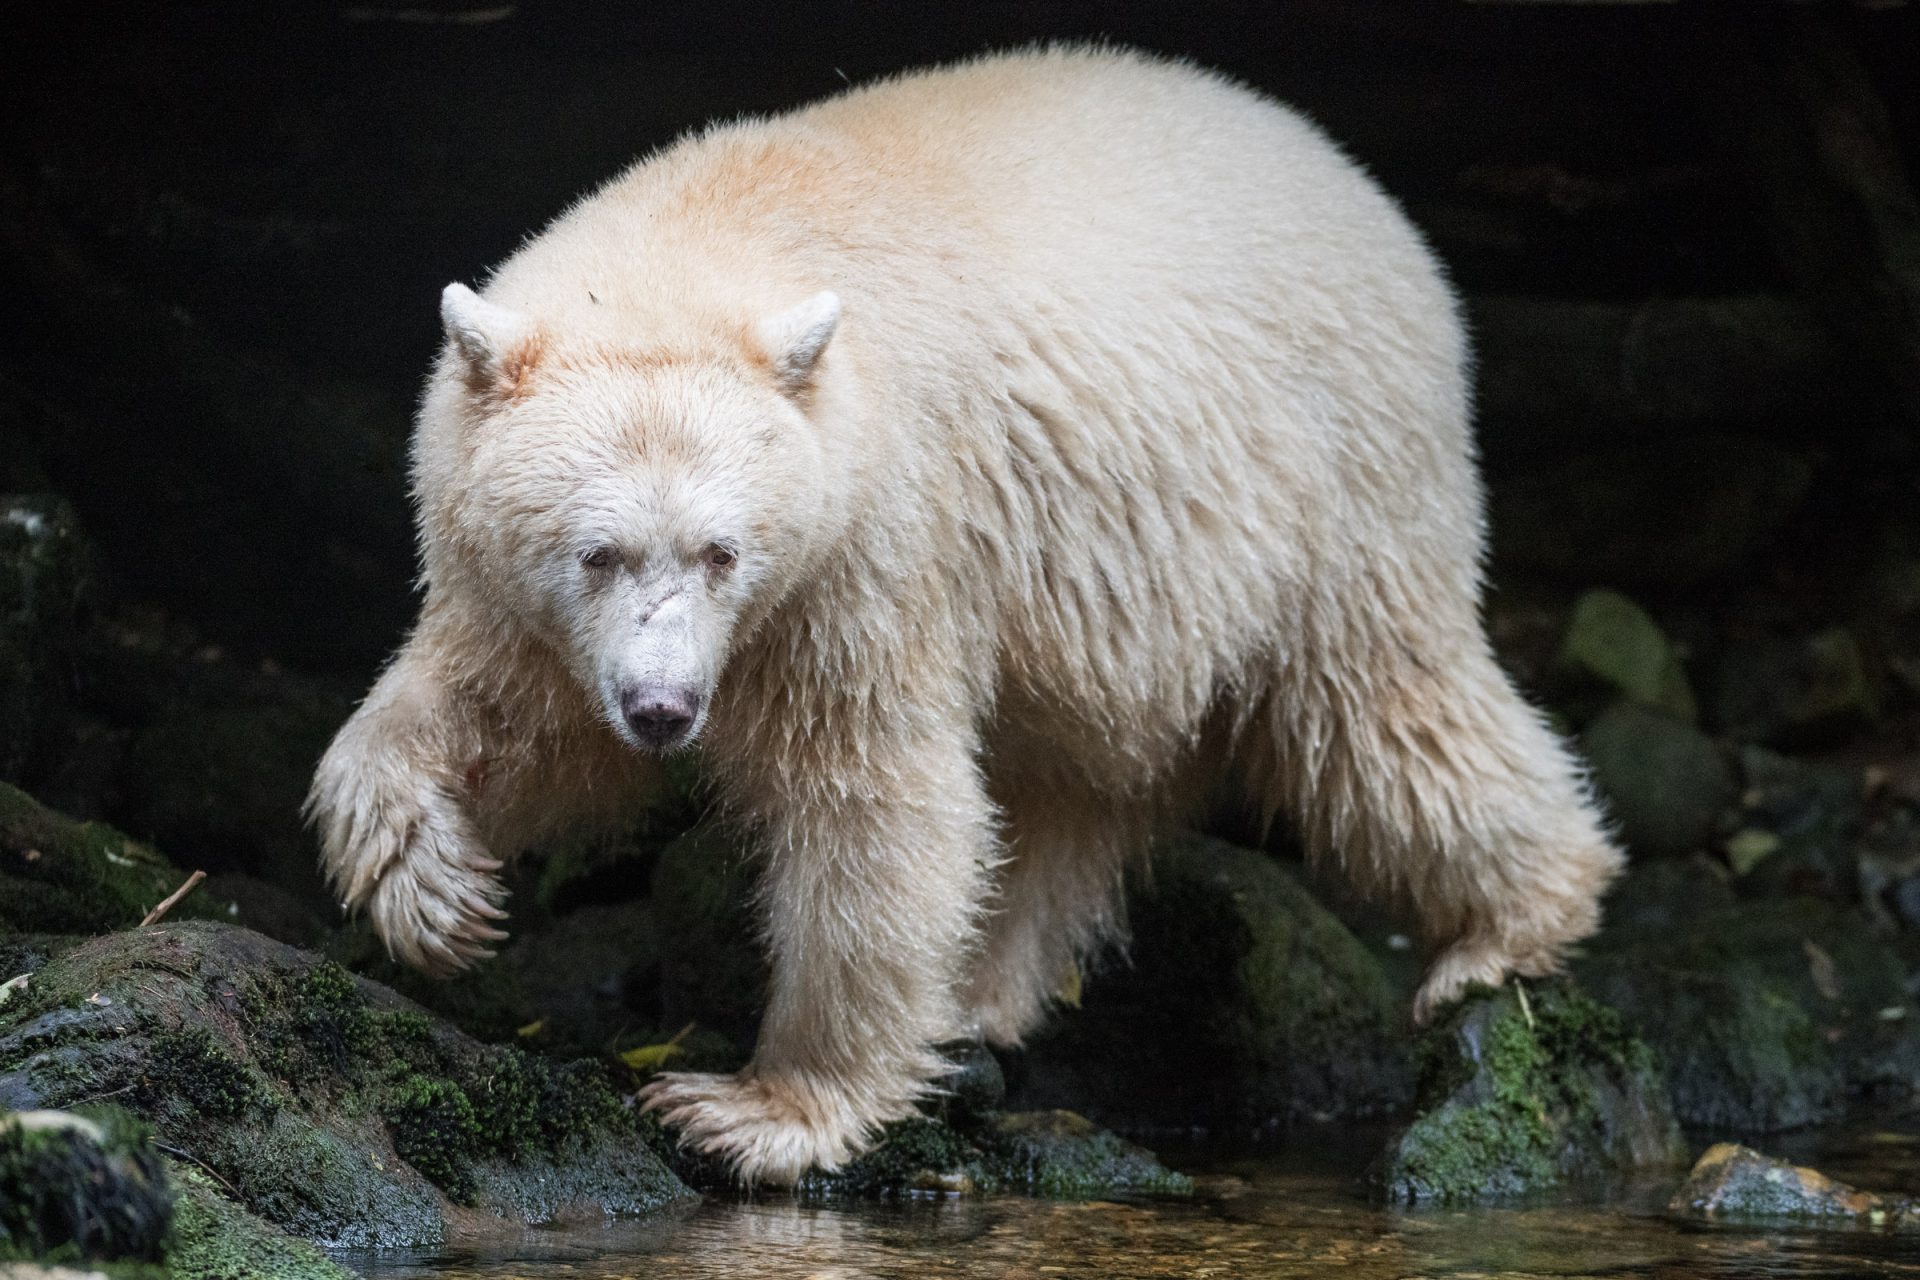 A spirit bear, or kermode bear (Ursus americanus kermodei), known as "Warrior," wades through a river looking for spawning salmon. The kermode bear is neither albino or polar bear, but rather the white fur is formed from a recessive mutation of the MC1R gene. Great Bear Rainforest, British Columbia, Canada.